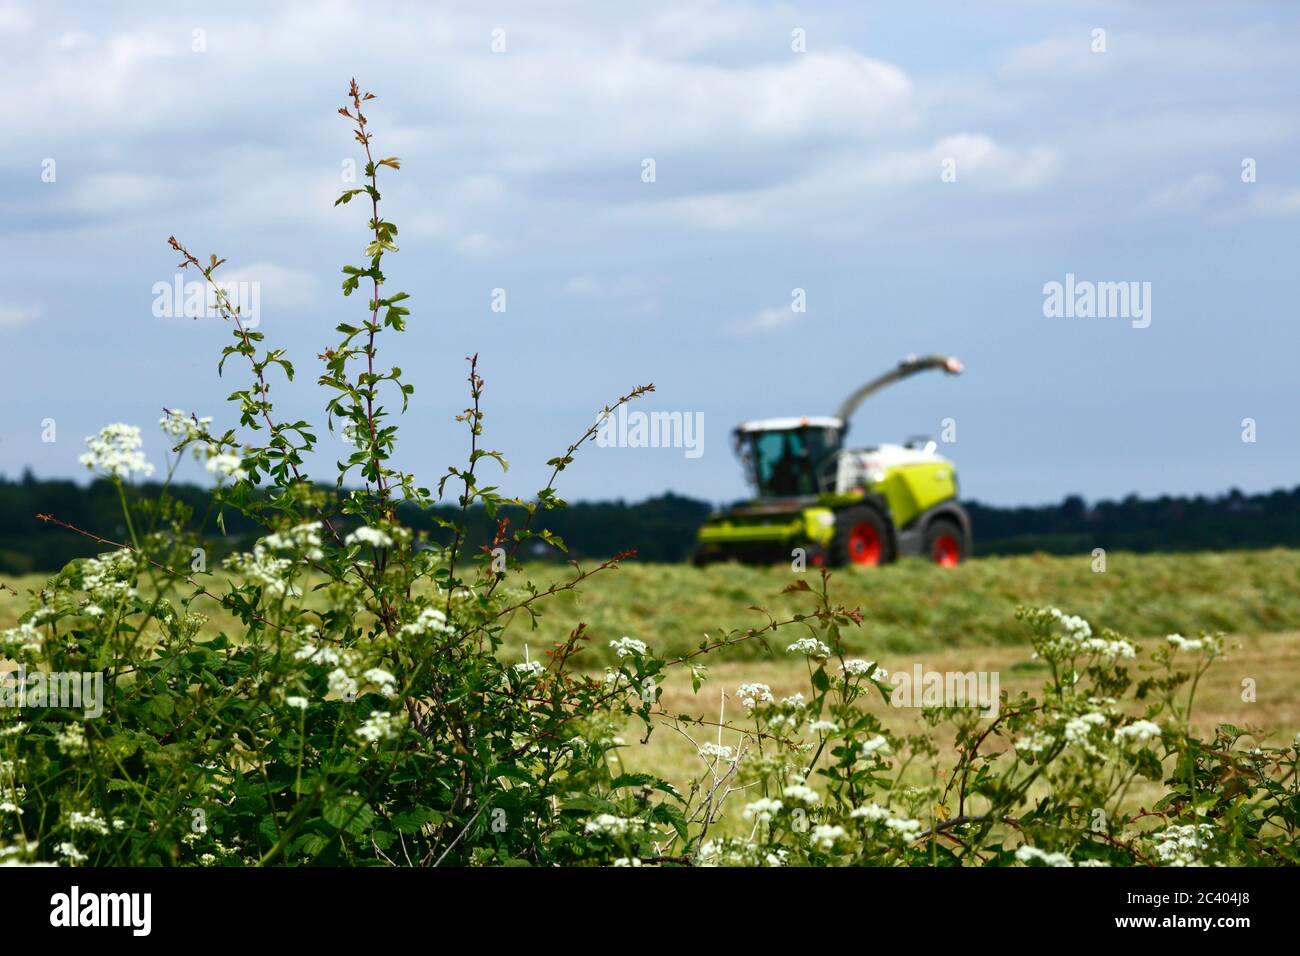 Forage harvester in field of recently cut grass and vegetation to make silage, Kent, England Stock Photo